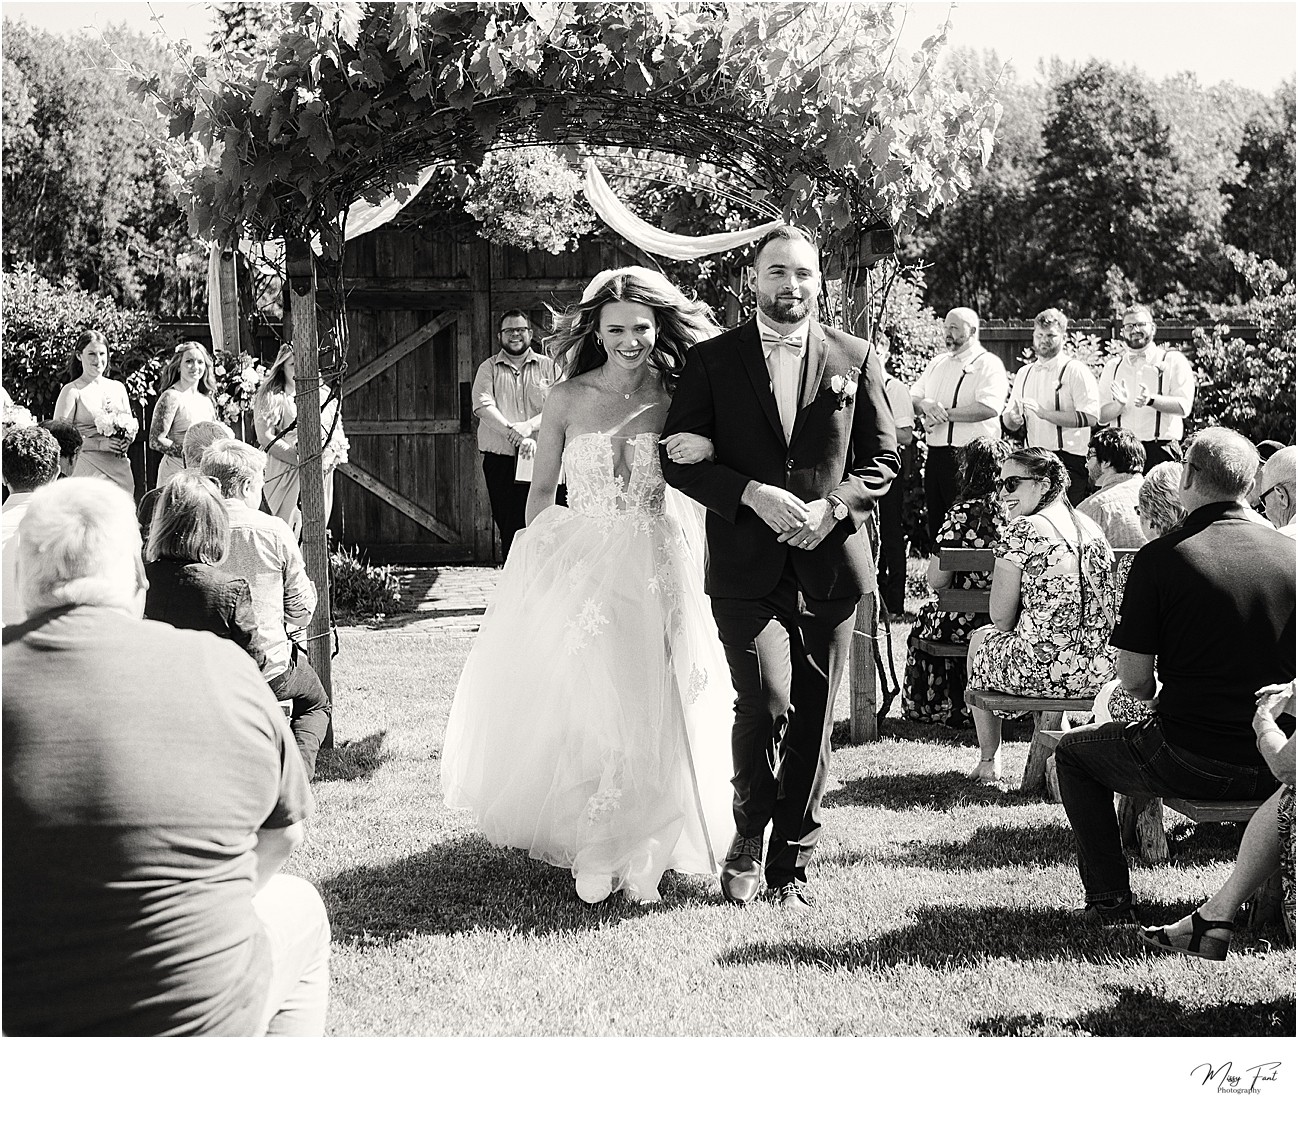 Love in full bloom at Vintage Gardens: Ashley and Zach’s Epic Wedding Bash in Ridgefield, WA!